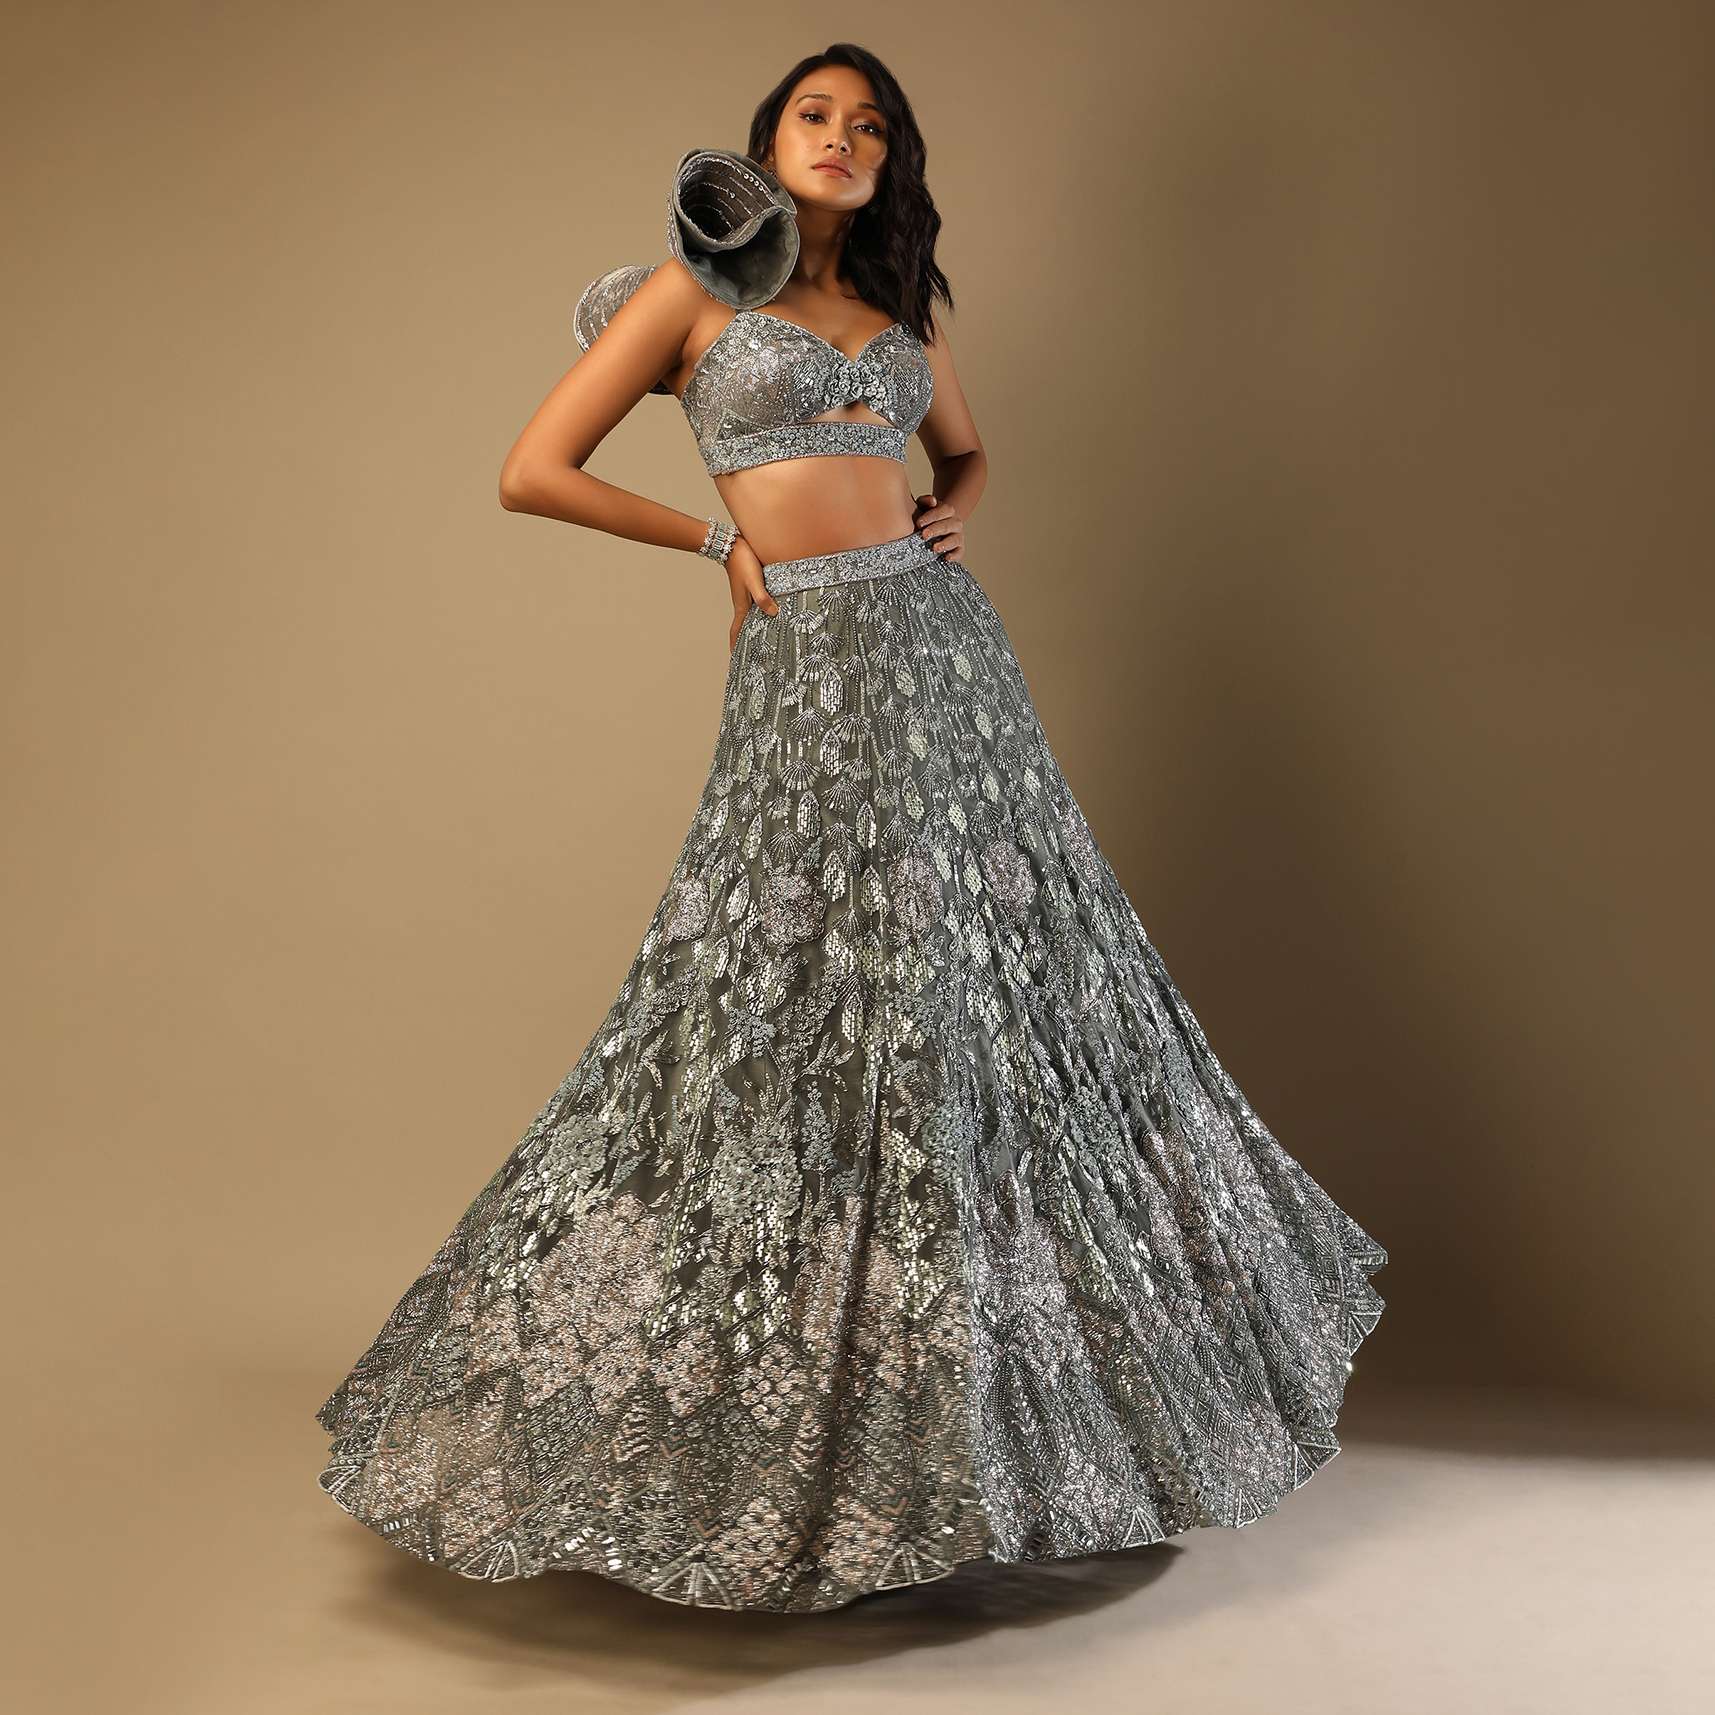 Fern Green Lehenga Choli In Net With Stone Hand Embroidered Floral Motifs And Fancy Origami Cones On The Shoulder